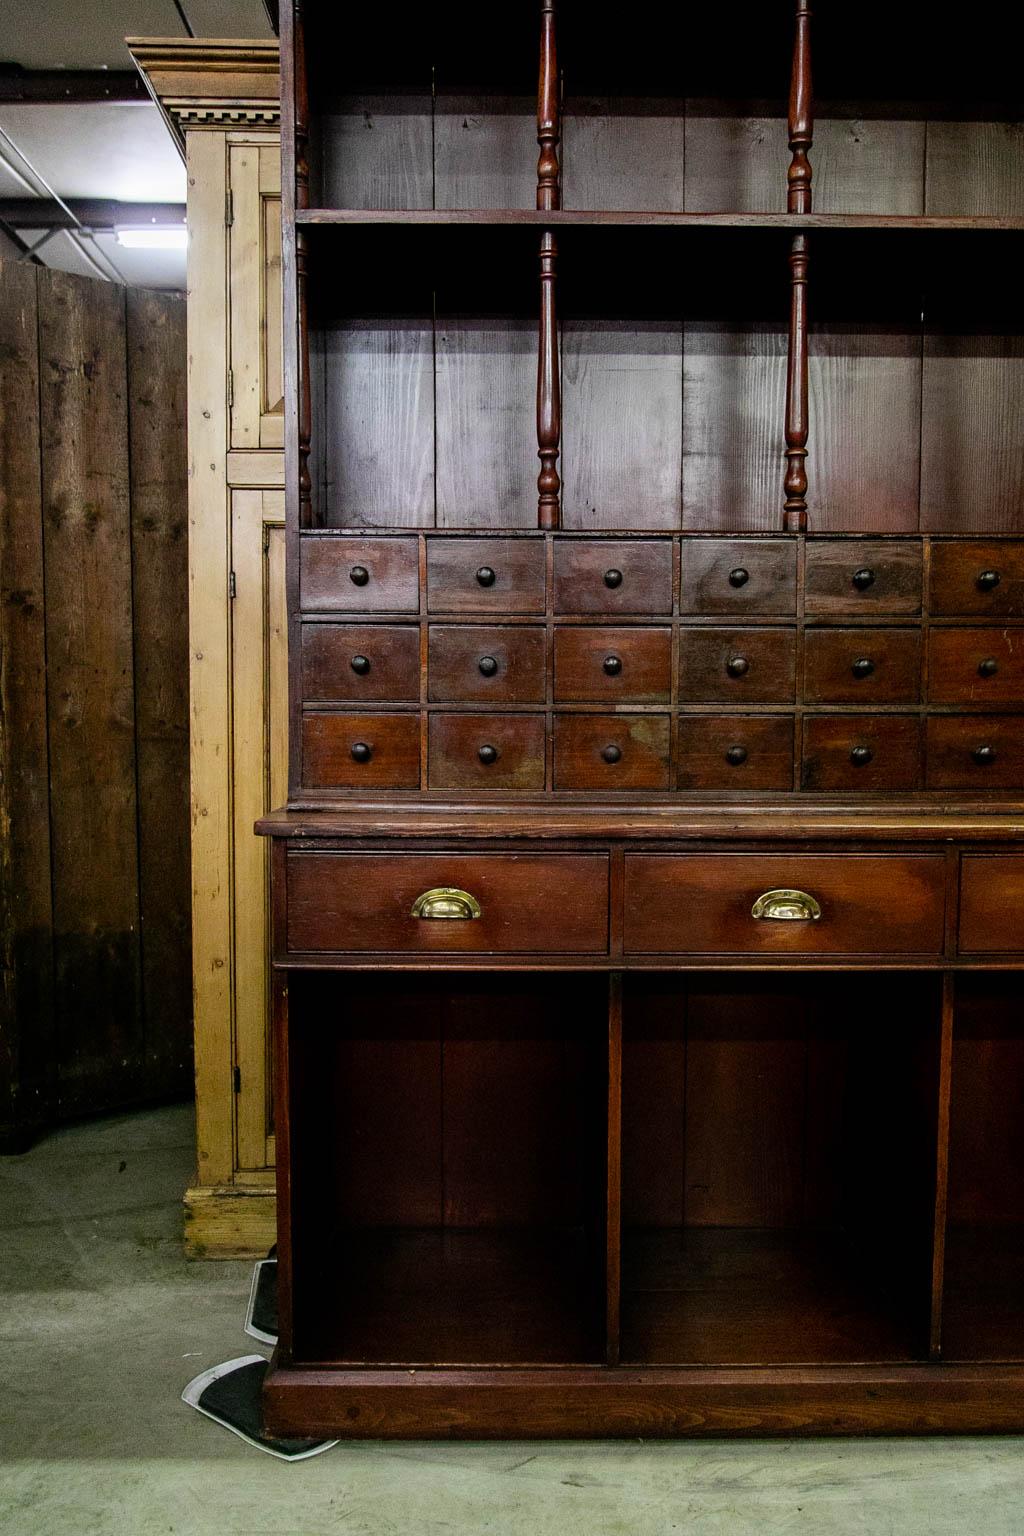 apothecary cabinet